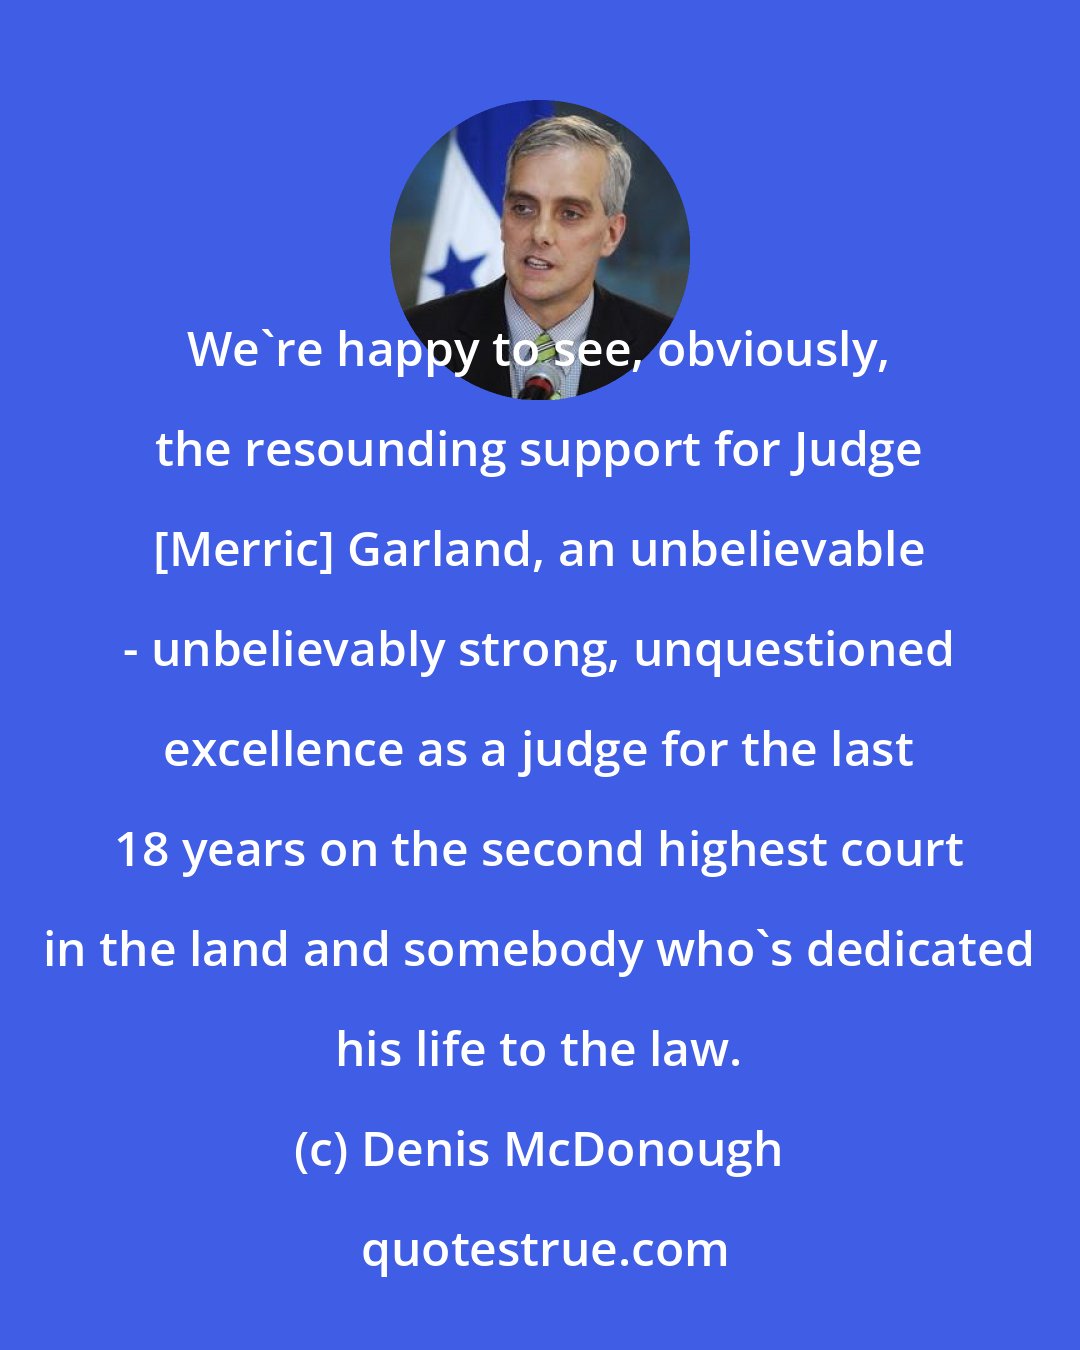 Denis McDonough: We're happy to see, obviously, the resounding support for Judge [Merric] Garland, an unbelievable - unbelievably strong, unquestioned excellence as a judge for the last 18 years on the second highest court in the land and somebody who's dedicated his life to the law.